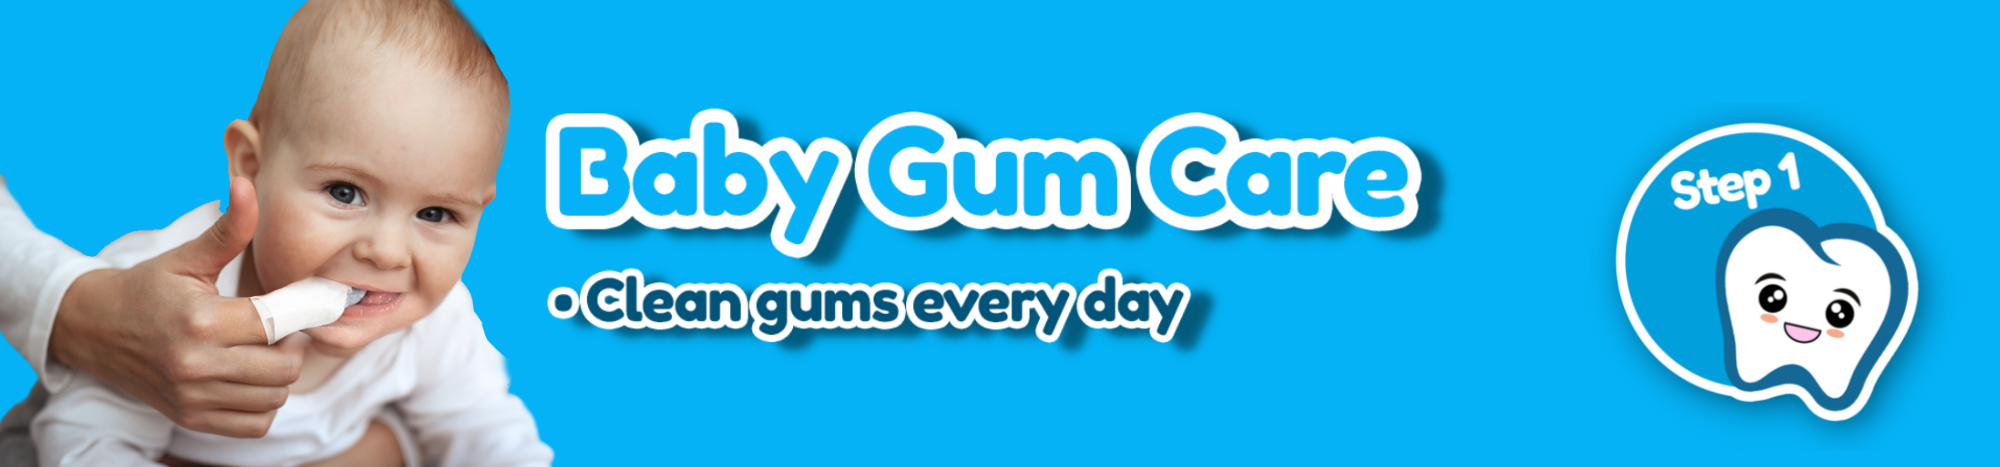 Baby gum care - best baby toothbrush and dental wipes